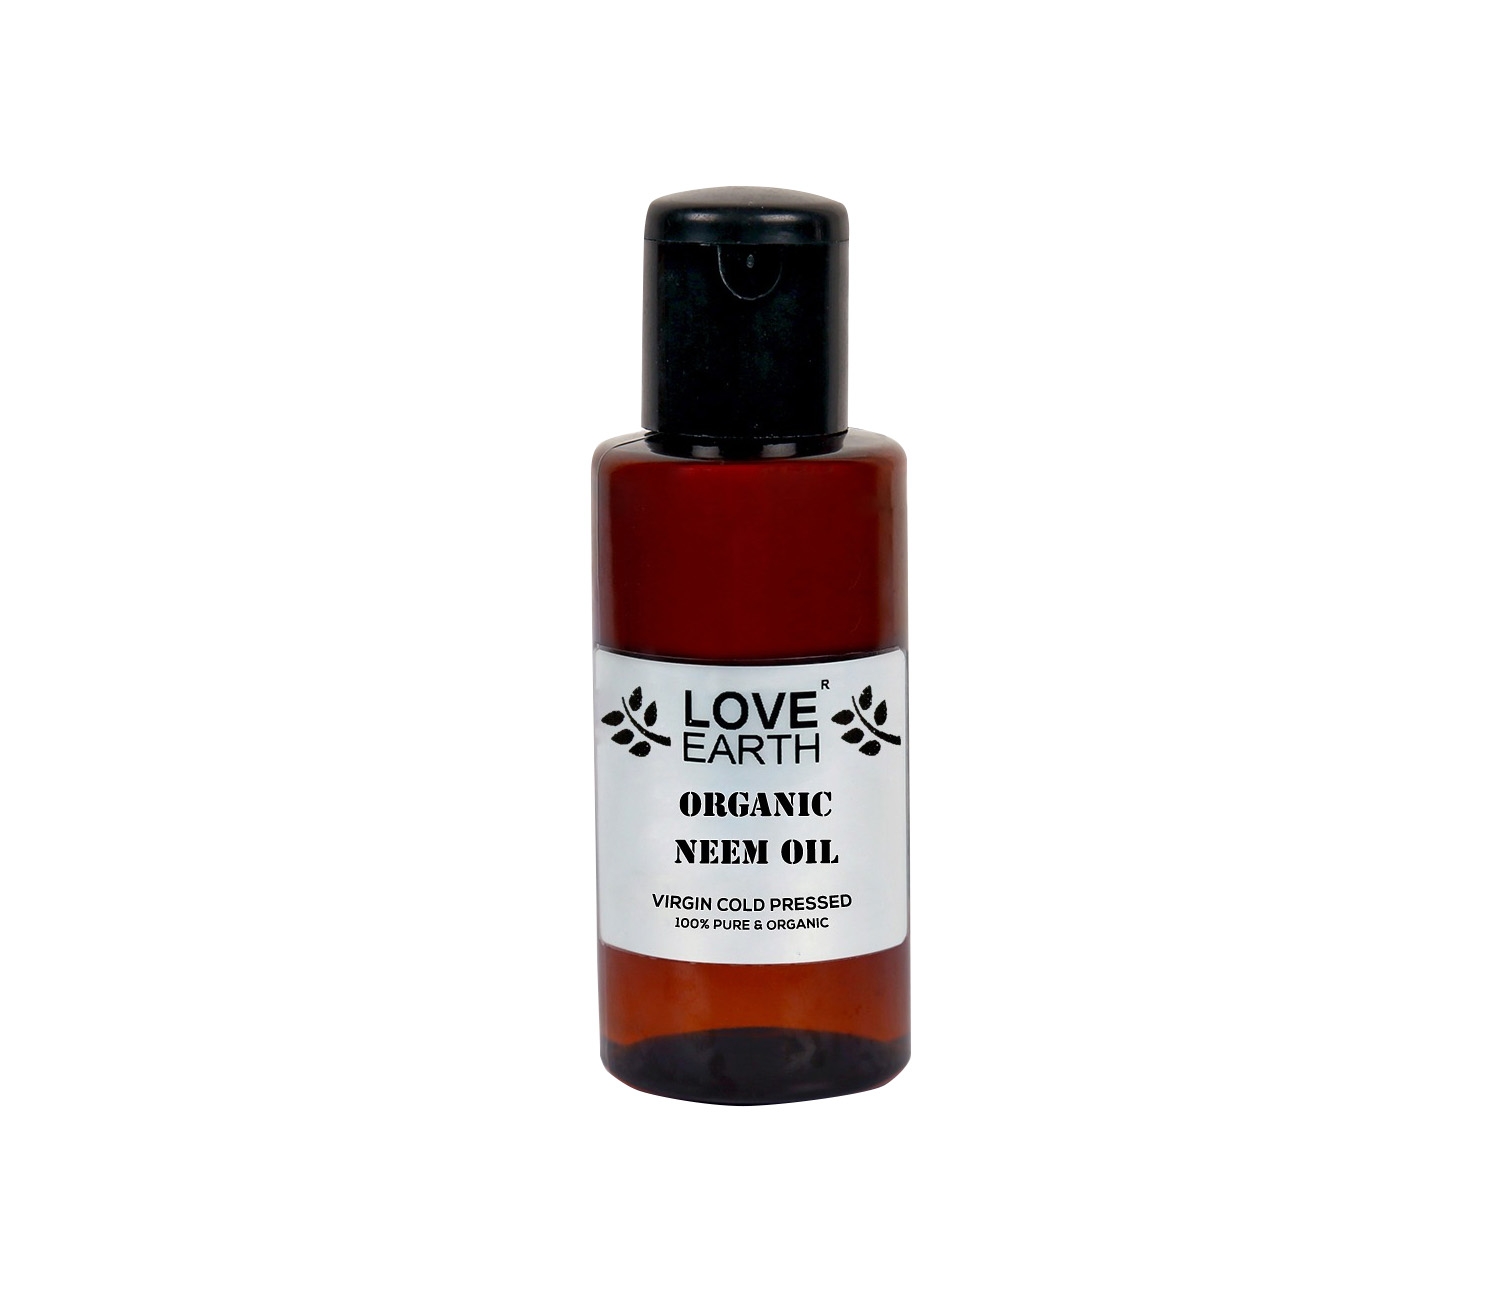 LOVE EARTH | Love Earth Organic Neem Oil With Natural Virgin Cold Pressed Neem For Reduces Acne Prevention & Pigmentation, Prevents Skin Inflammation, Reduces Dandruff & Controls Flaky Scalp